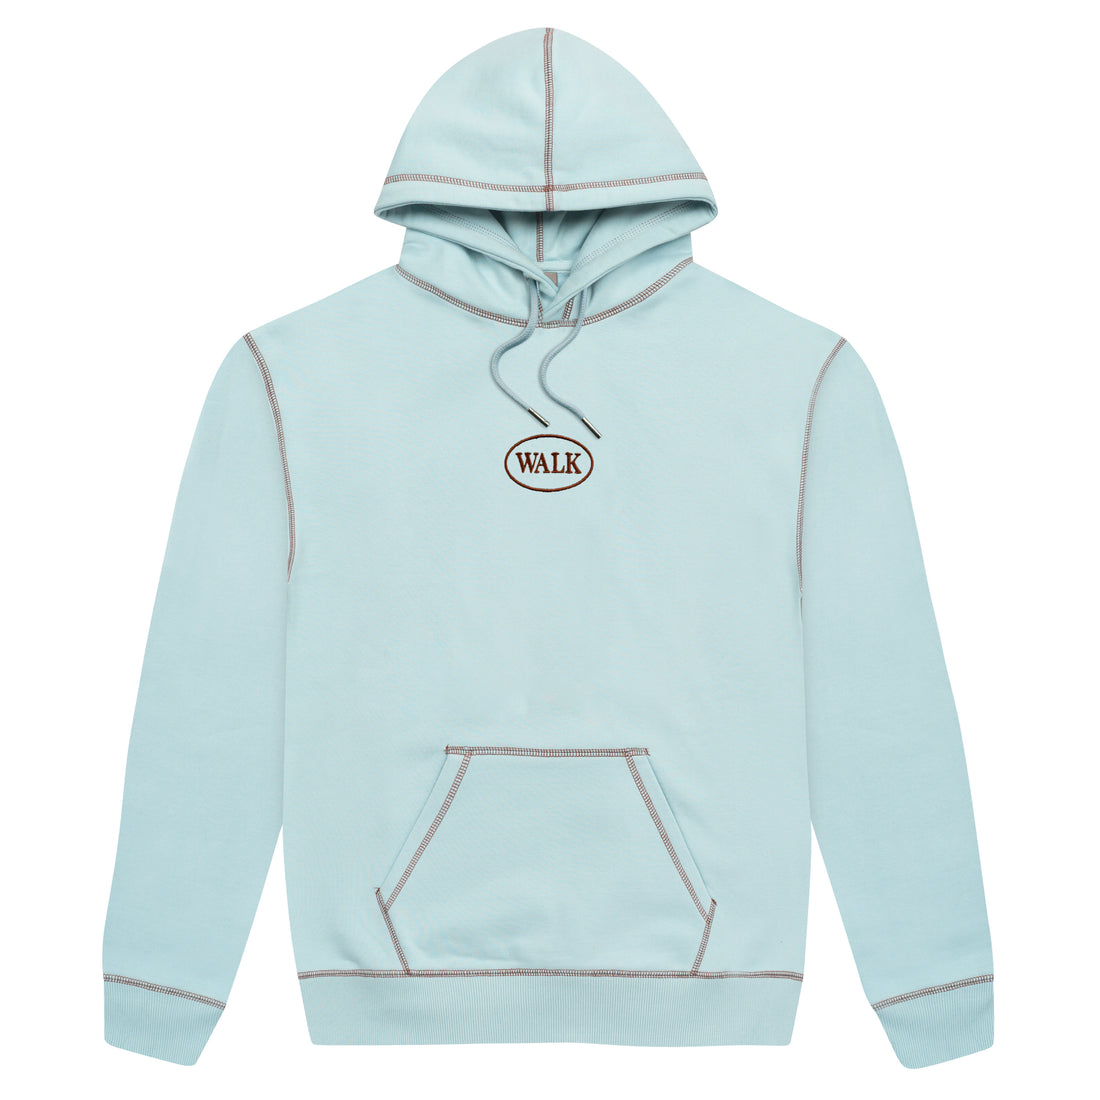 THE FROSTED BLUE HOODIE